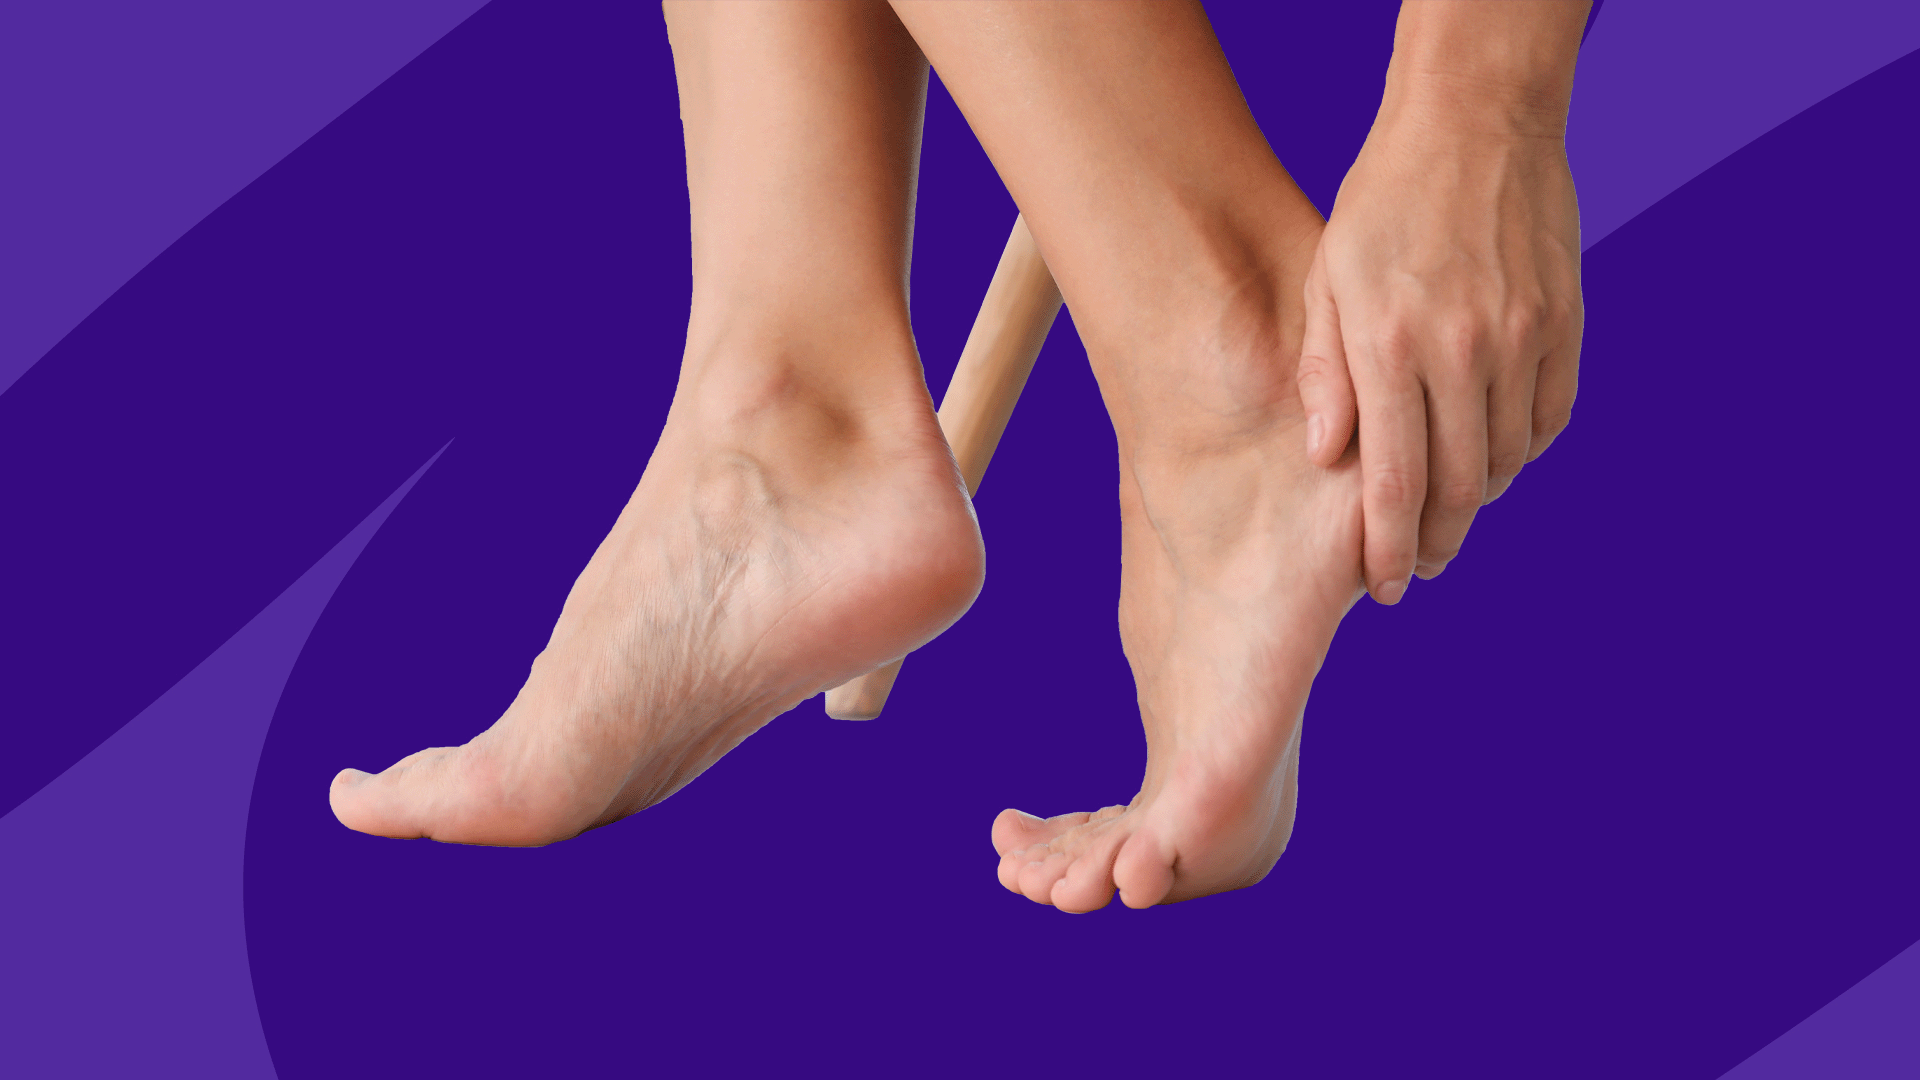 What causes foot pain? Related conditions and treatments